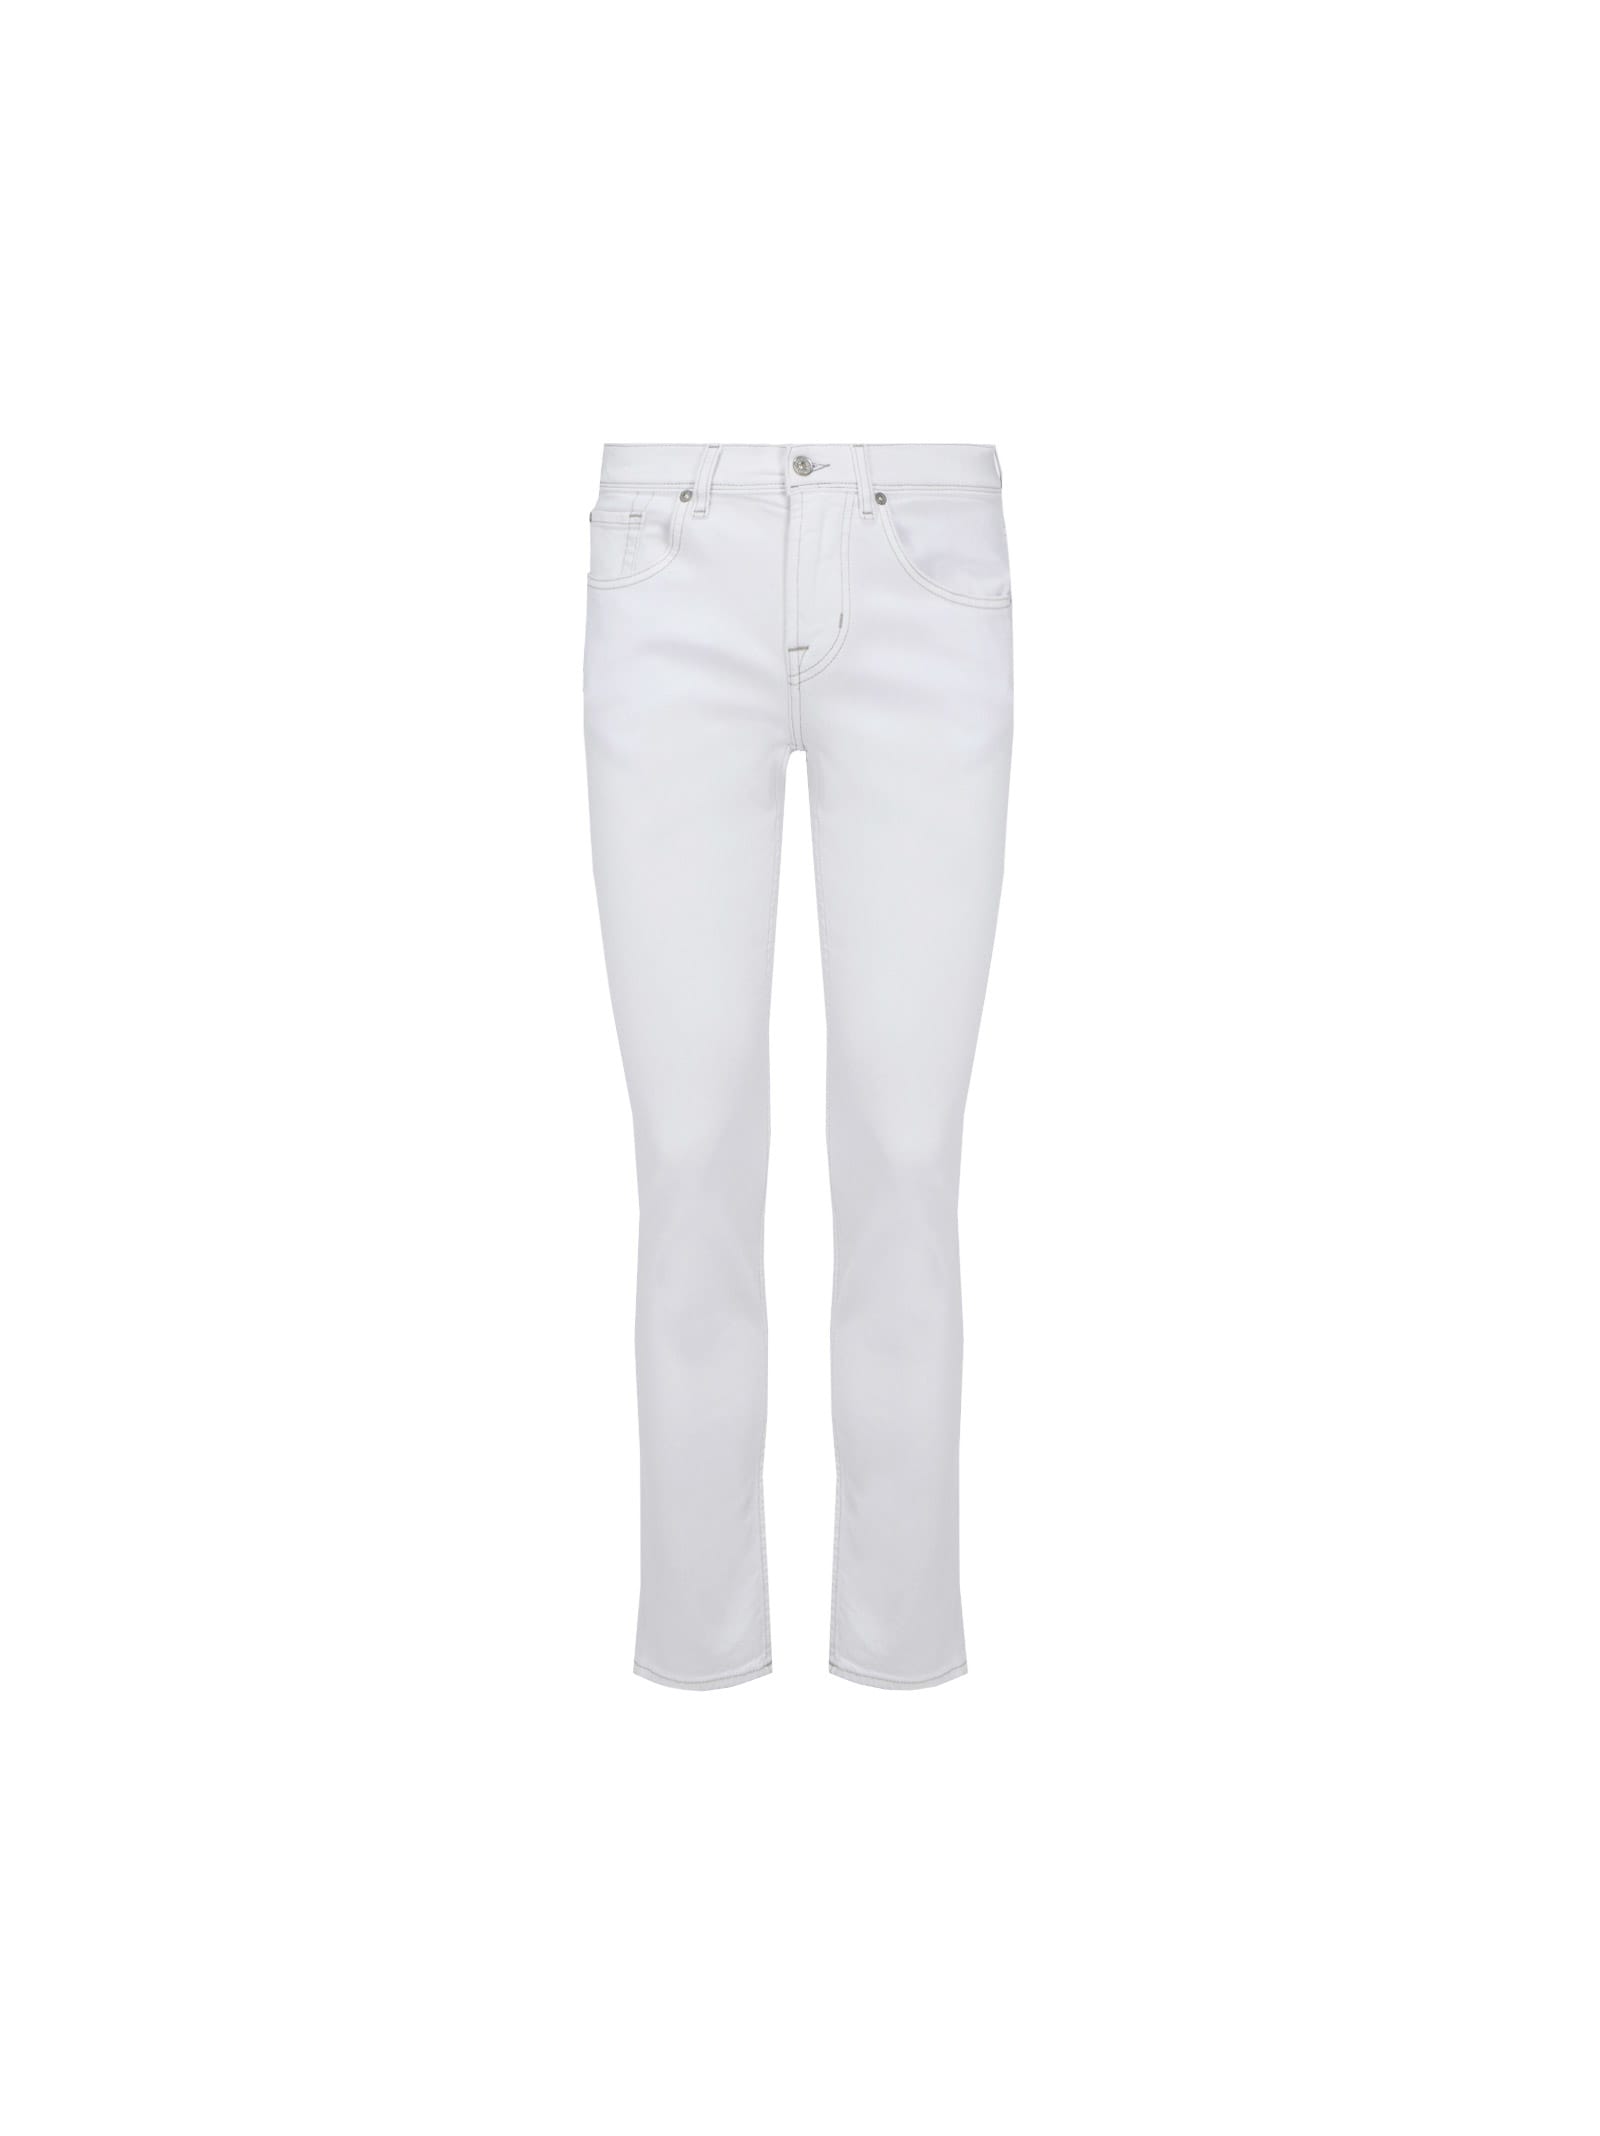 7 For All Mankind Slimmy Tapered Stunning Jeans